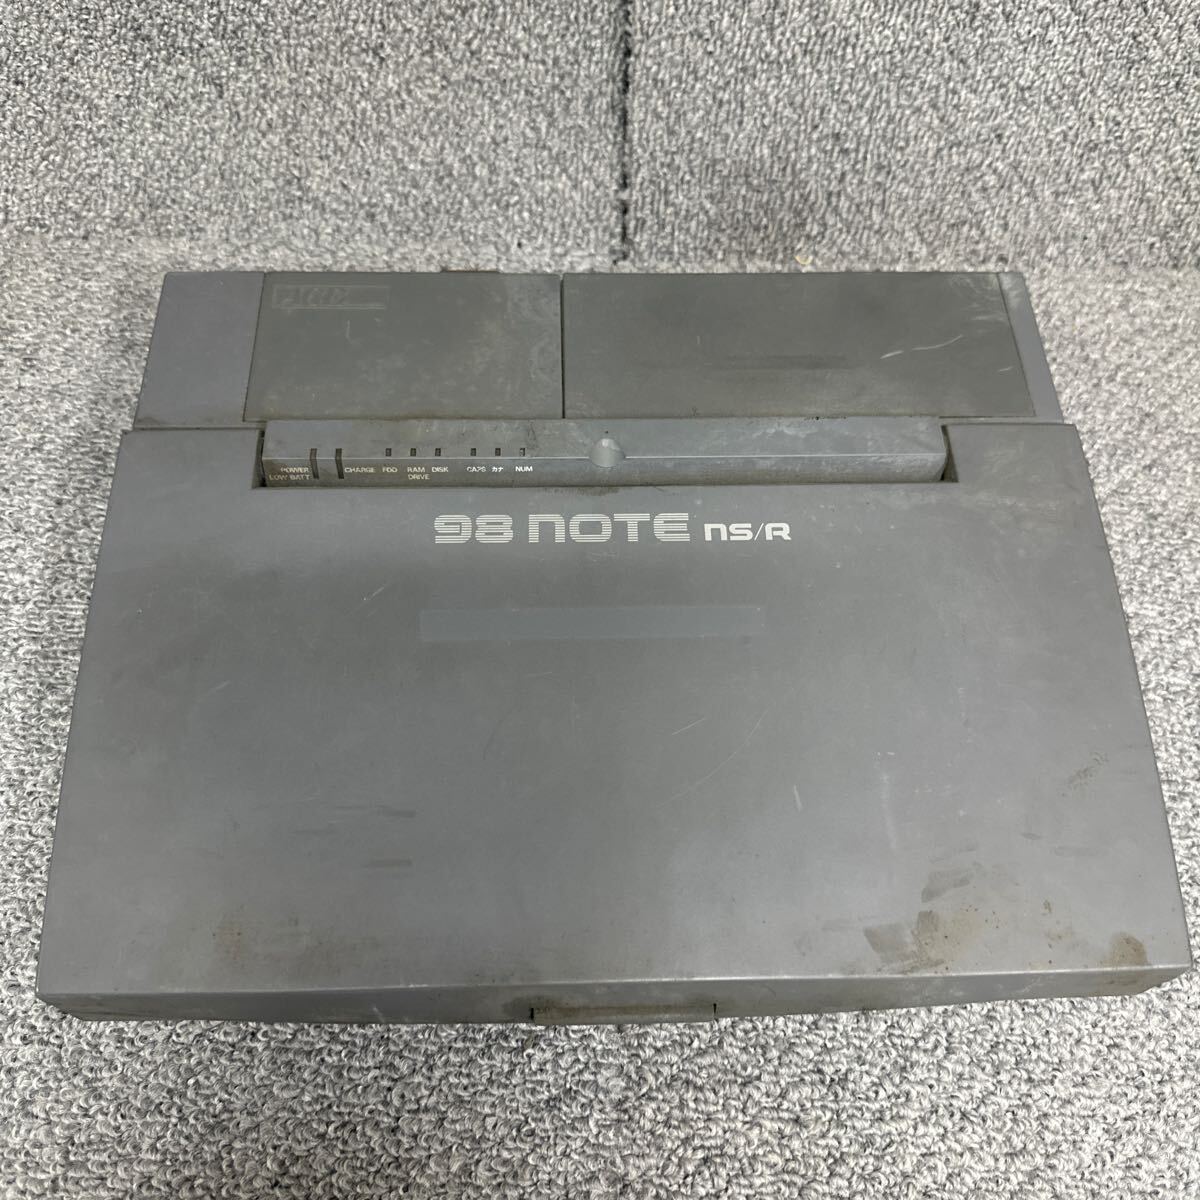 PCN98-1646 super-discount PC98 notebook NEC PC-9801NS/R electrification un- possible Junk including in a package possibility 